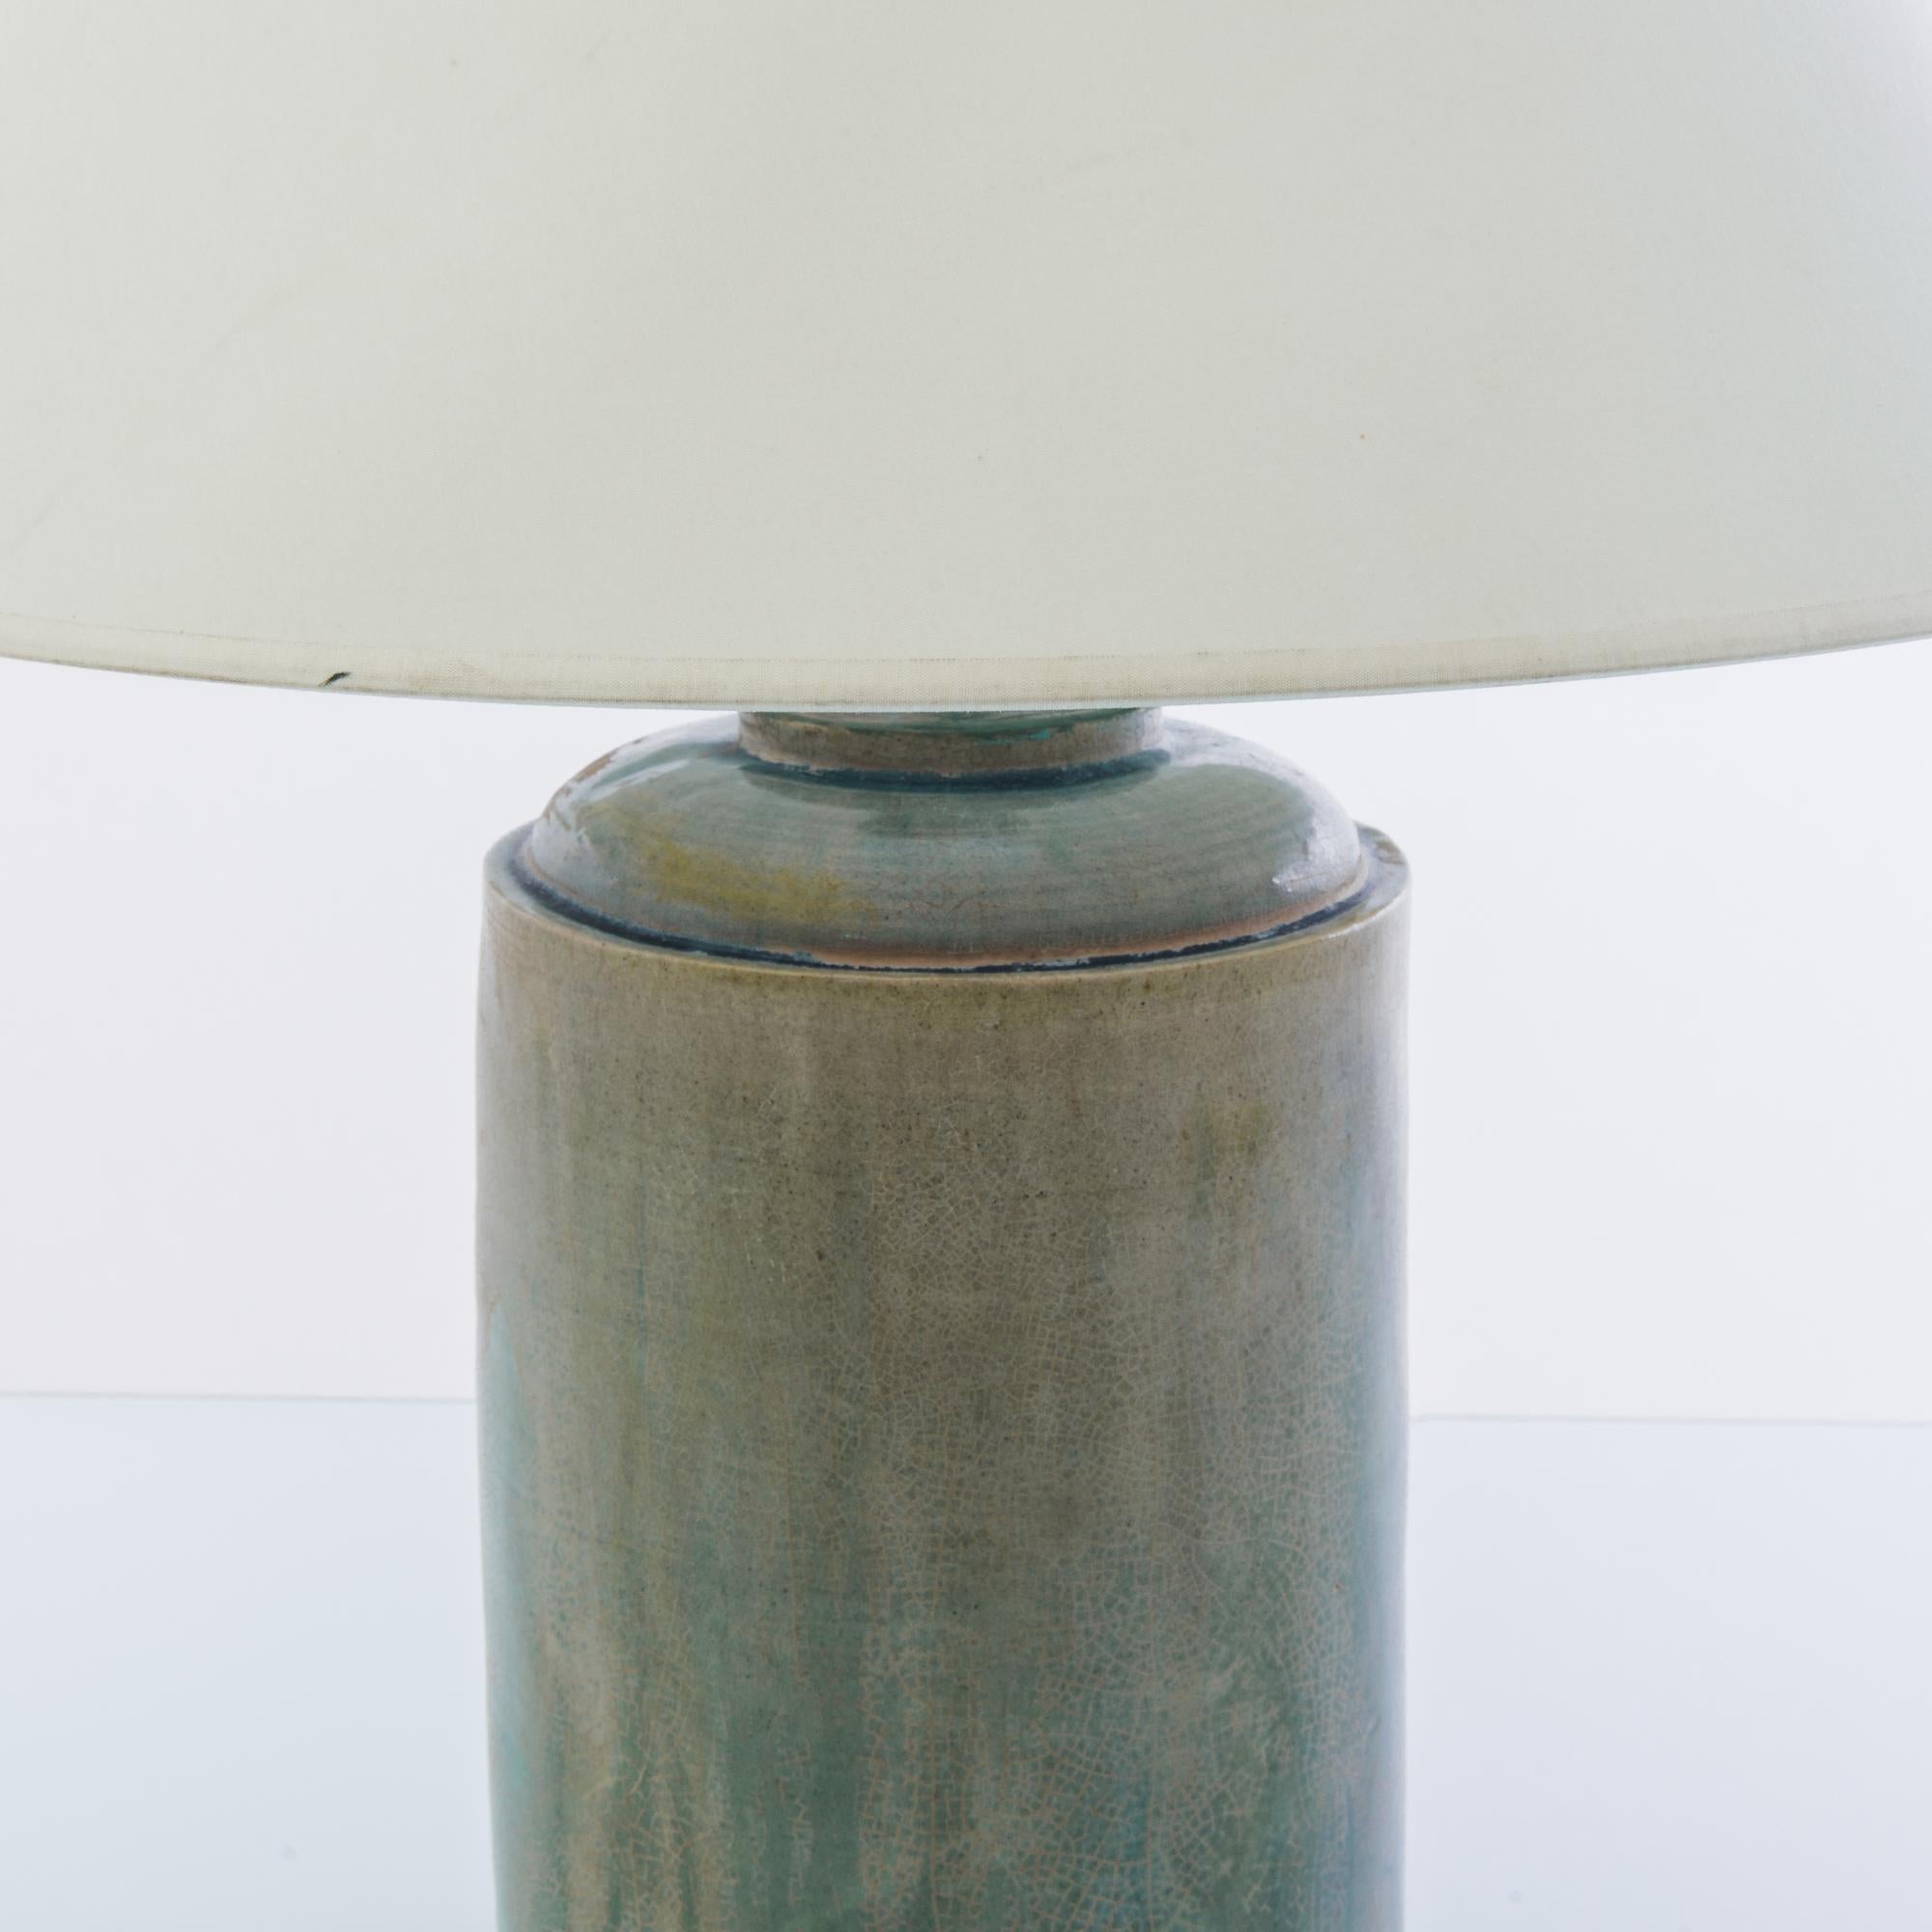 This finely crafted vintage Chinese vase has been fitted with an adjustable brass fixture and E26 lighting socket. Textured glazes, attractive colors and clean modern forms make this a great fit for neutral contemporary interiors. 24.4